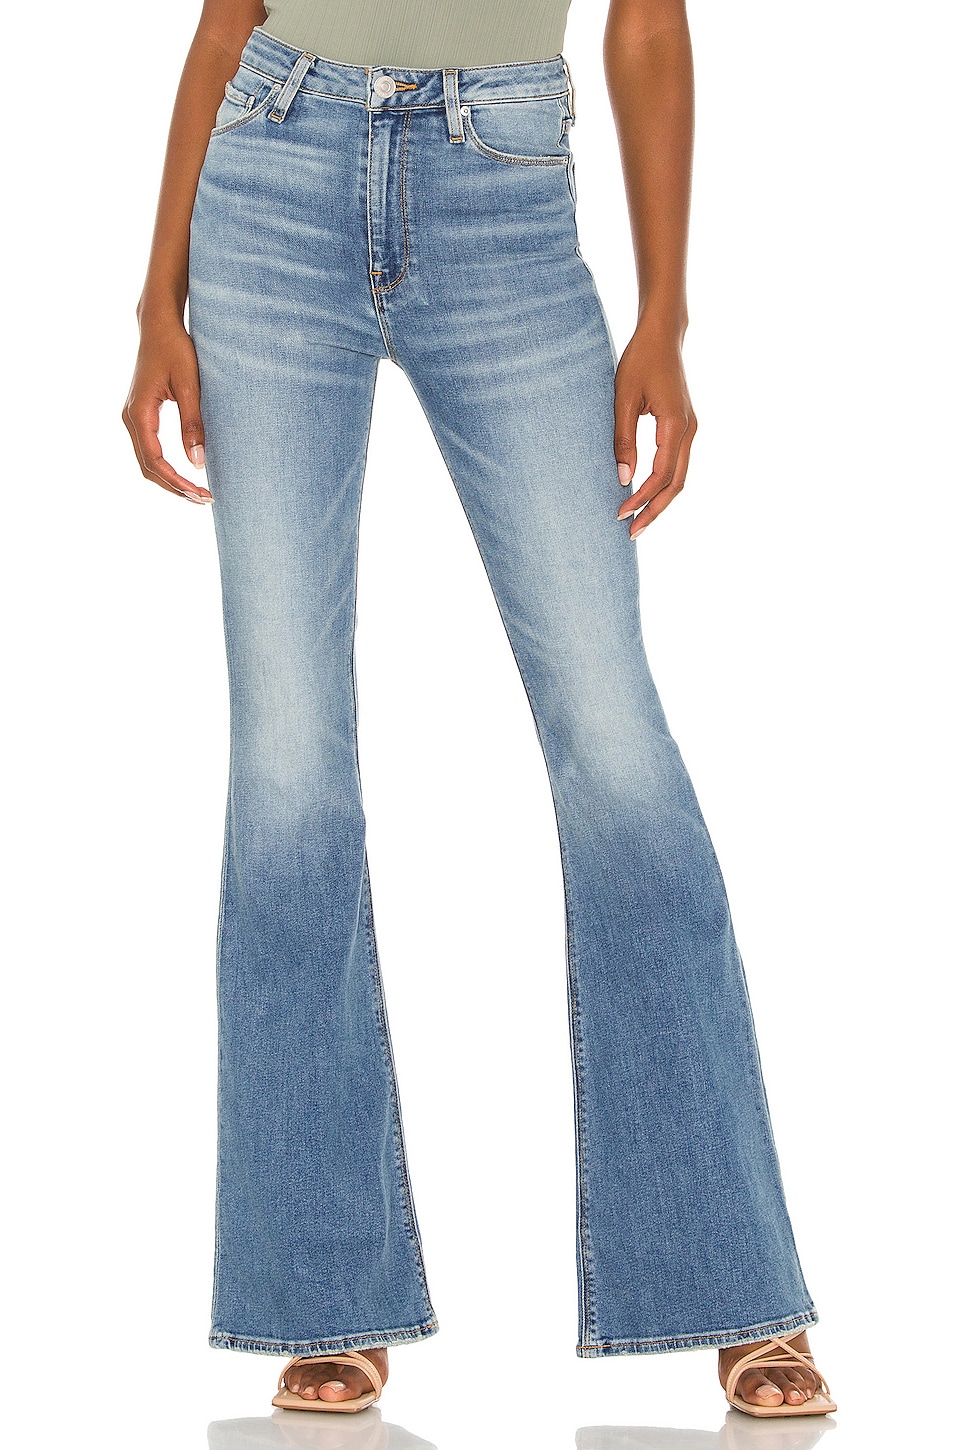 revolve.com | favorite Hudson Jeans Holly High Rise Flare Jean in Care Free